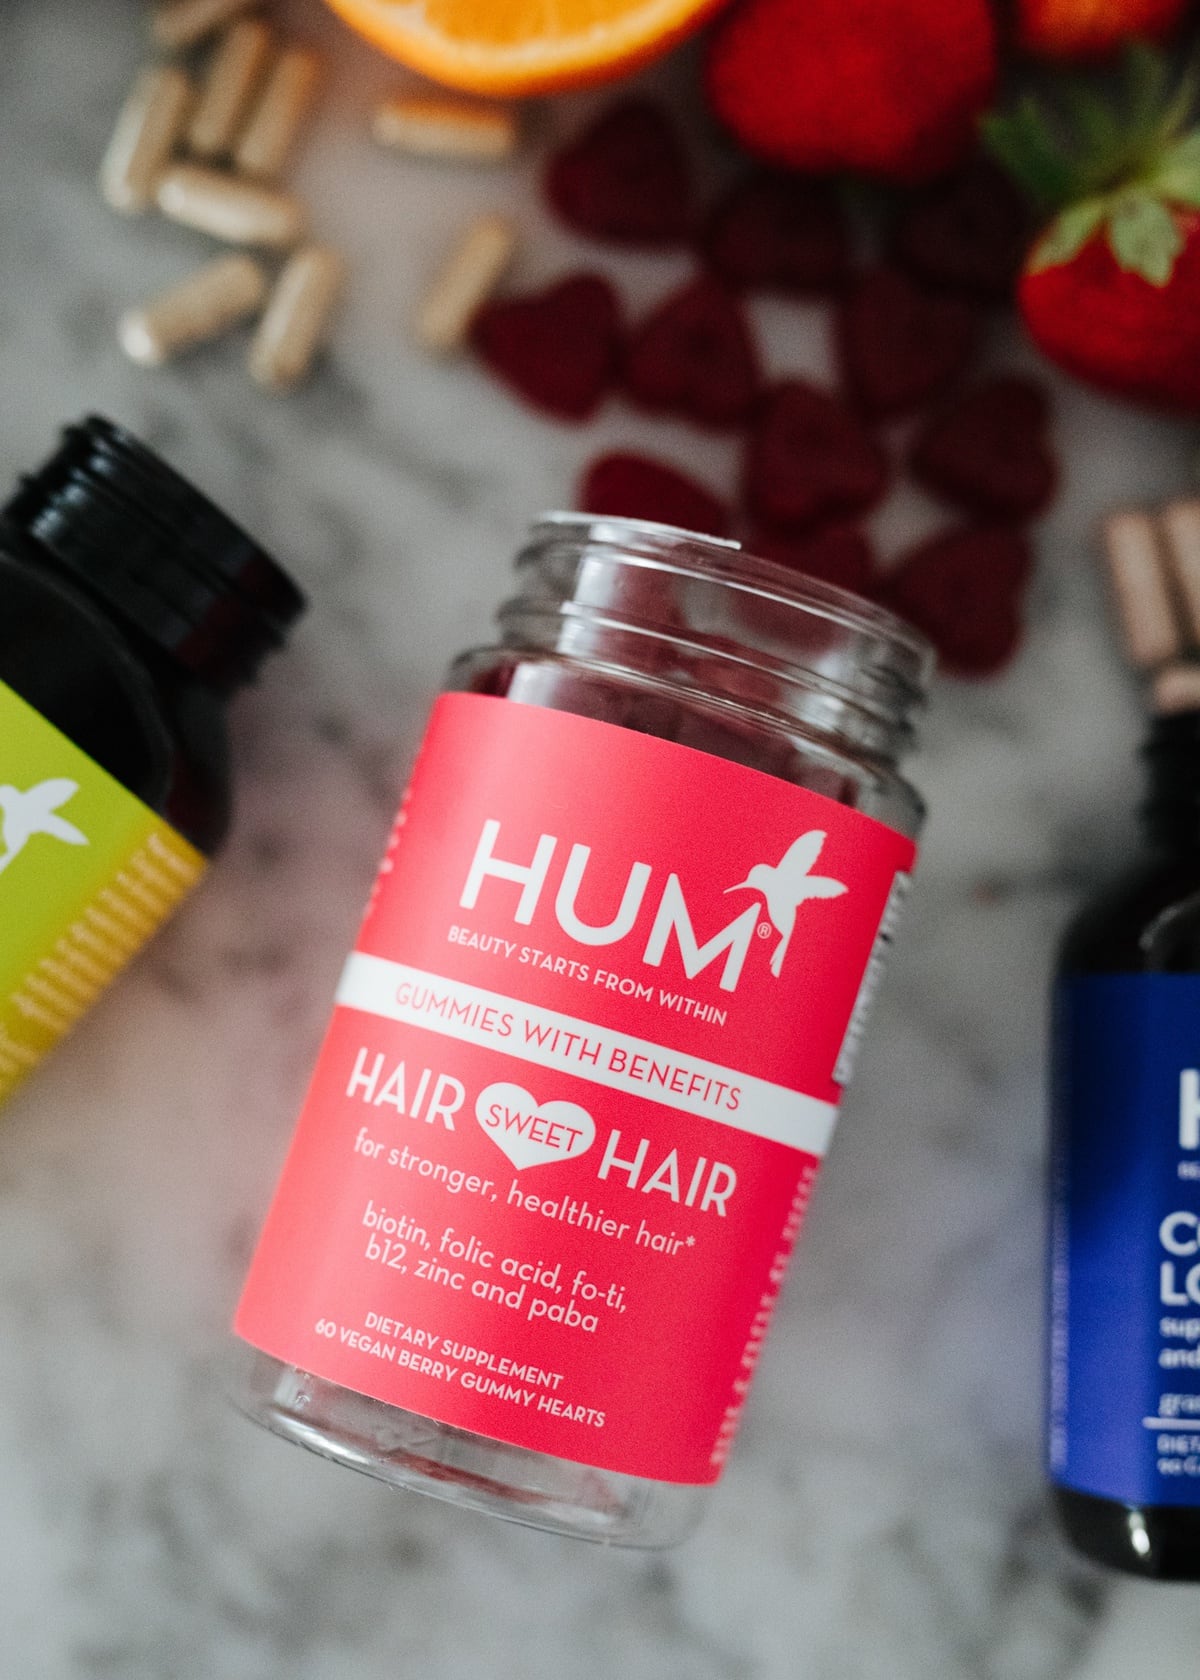 hair growing supplements